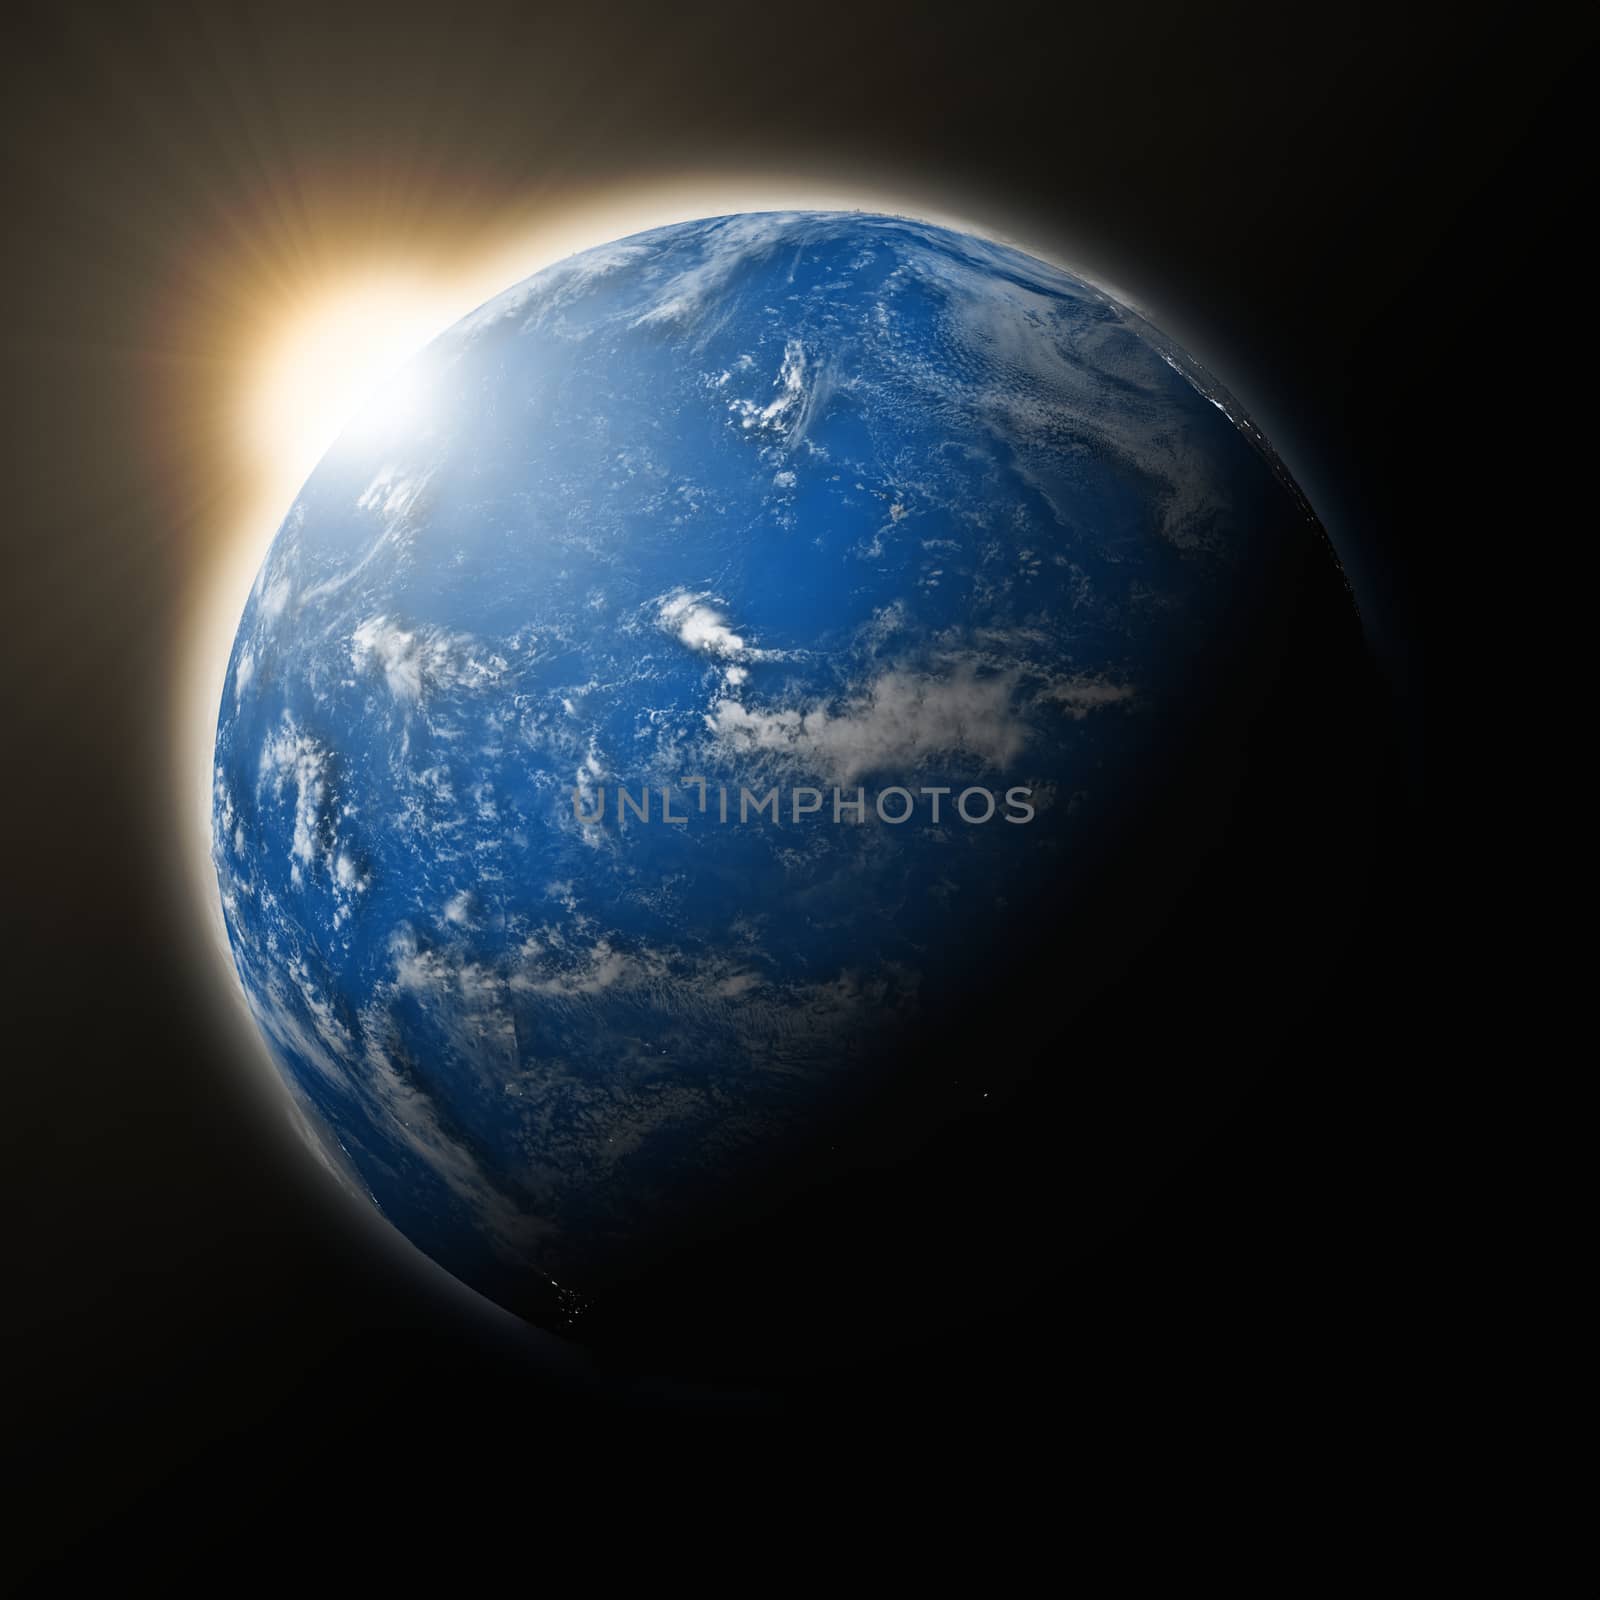 Sun over Pacific Ocean on blue planet Earth isolated on black background. Highly detailed planet surface. Elements of this image furnished by NASA.